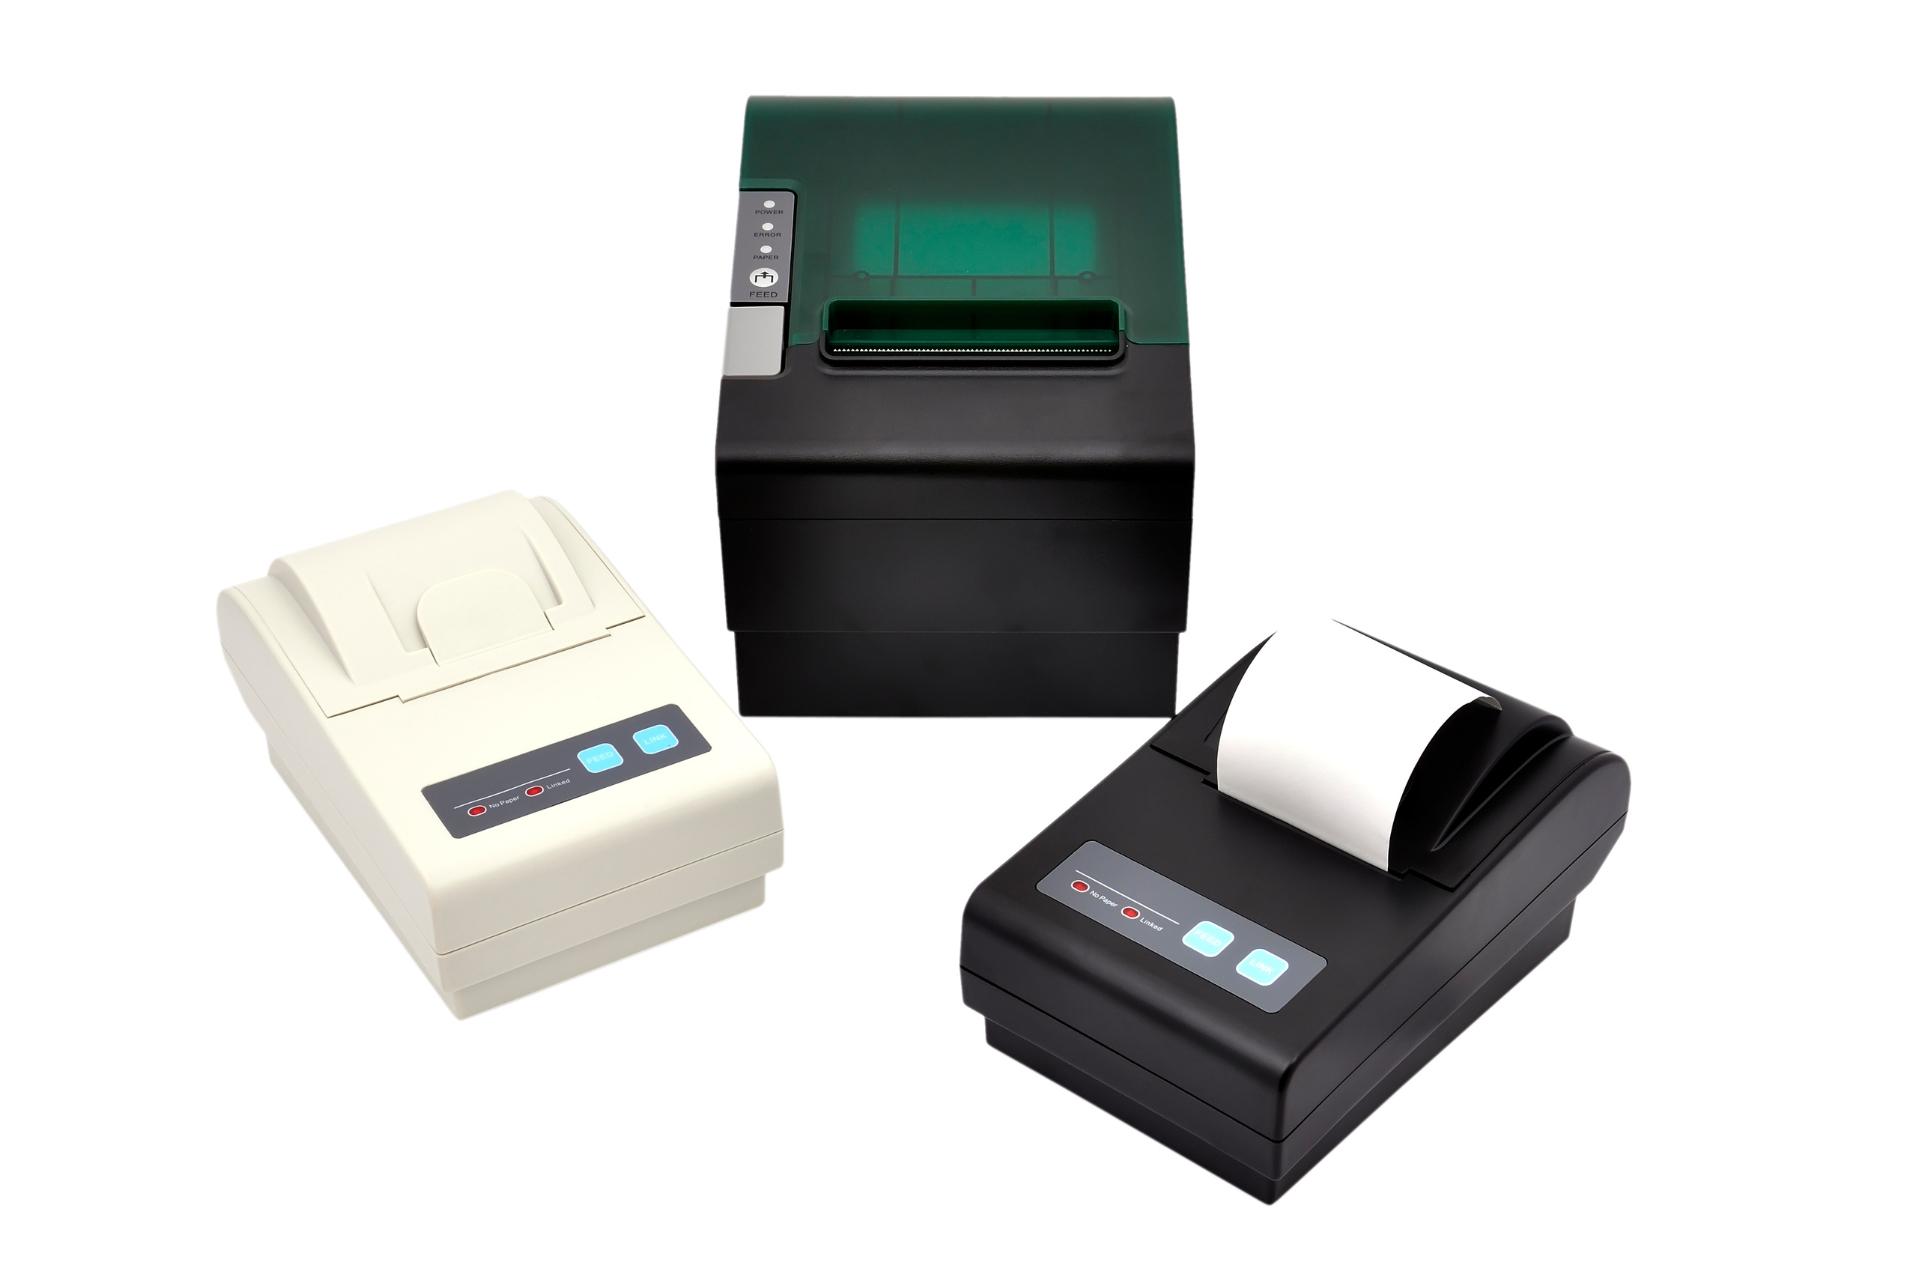  Different types of thermal printers next to each other